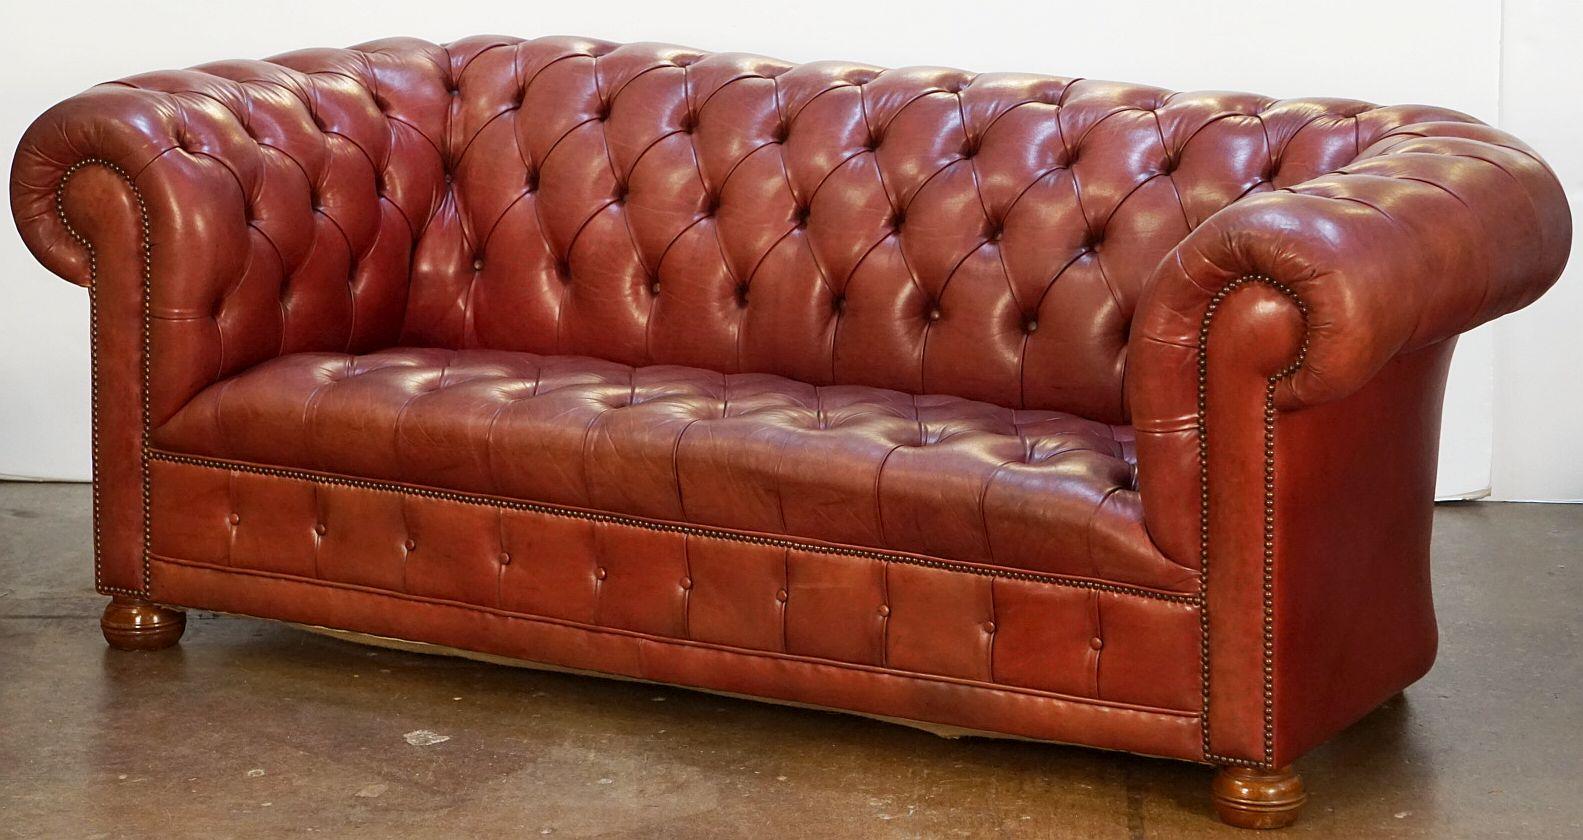  Large English Chesterfield Sofa of Tufted Leather 5